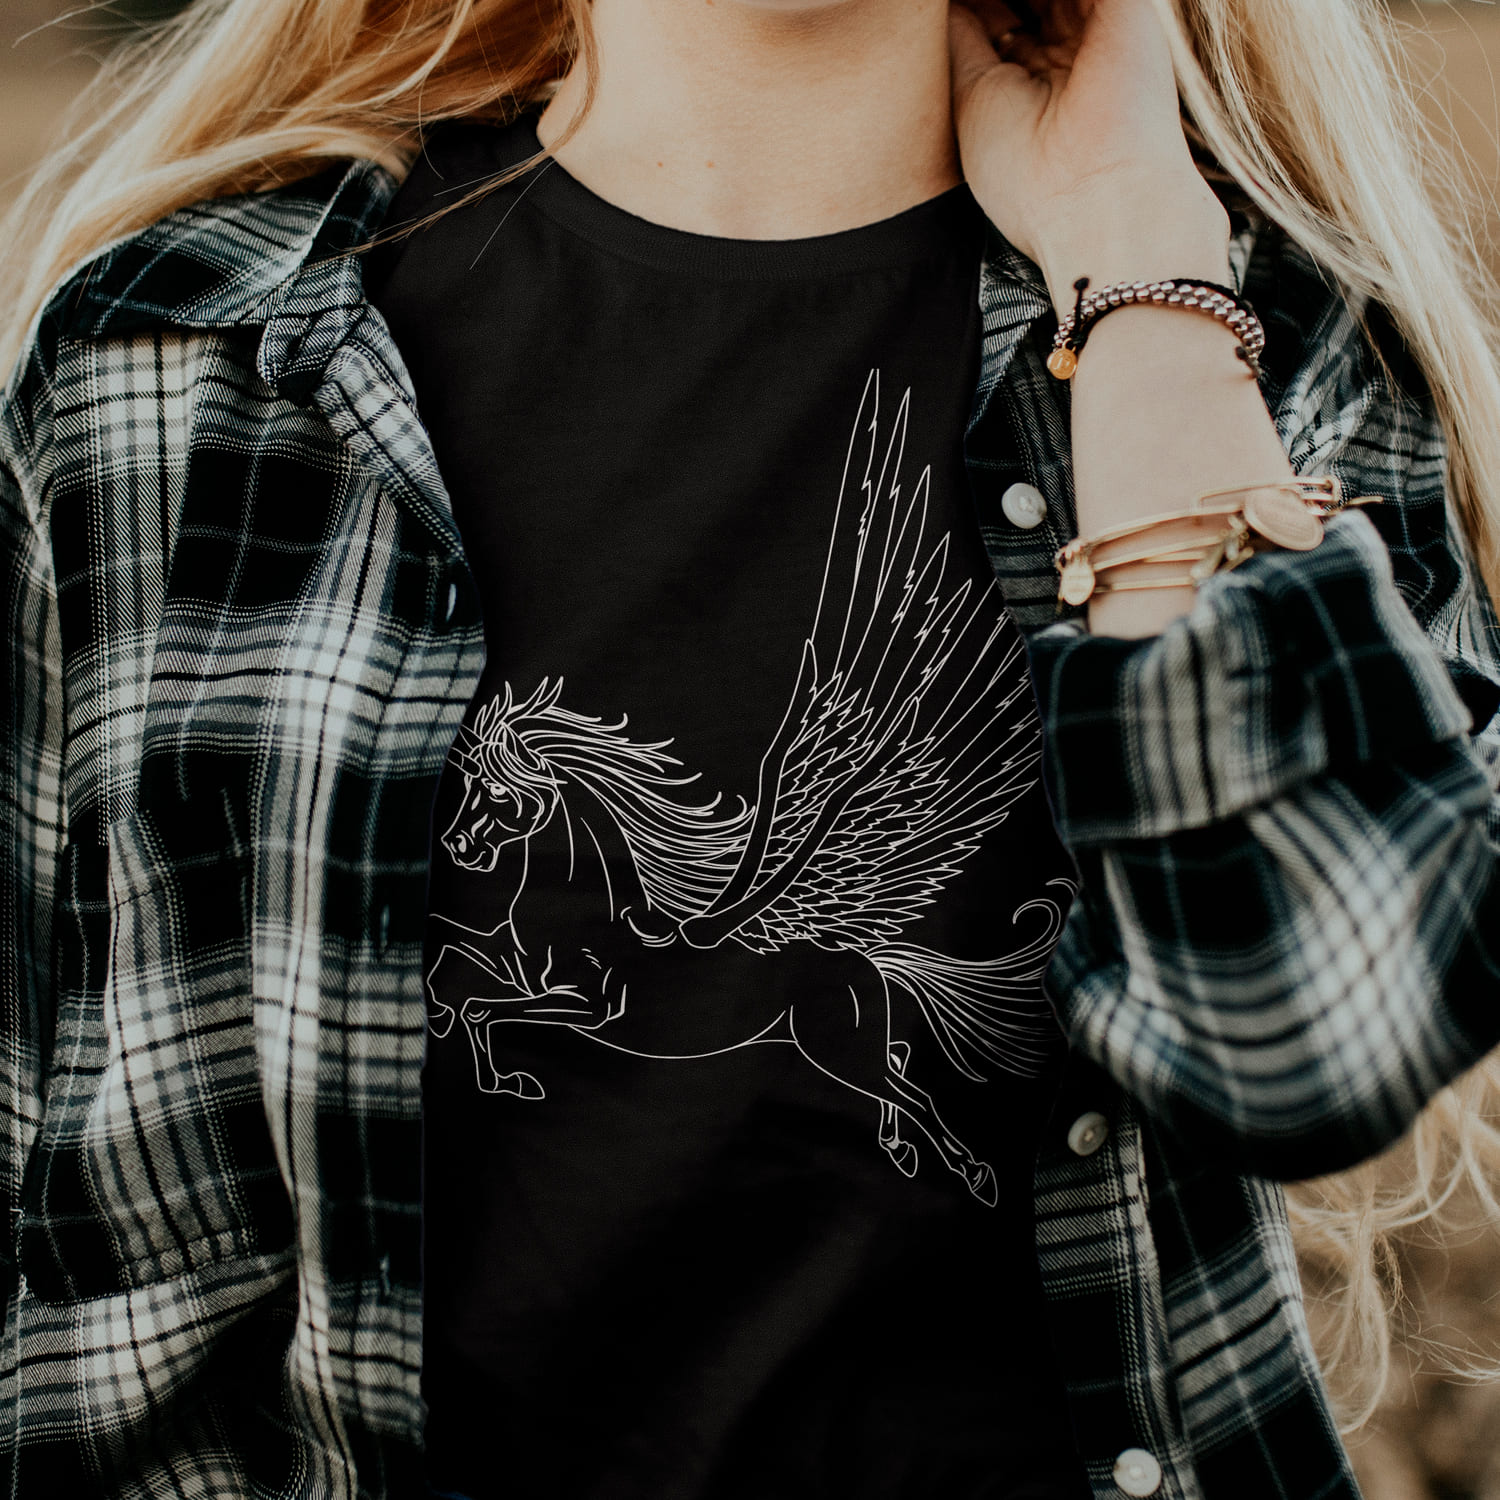 Black t-shirt with the simple unicorn print.